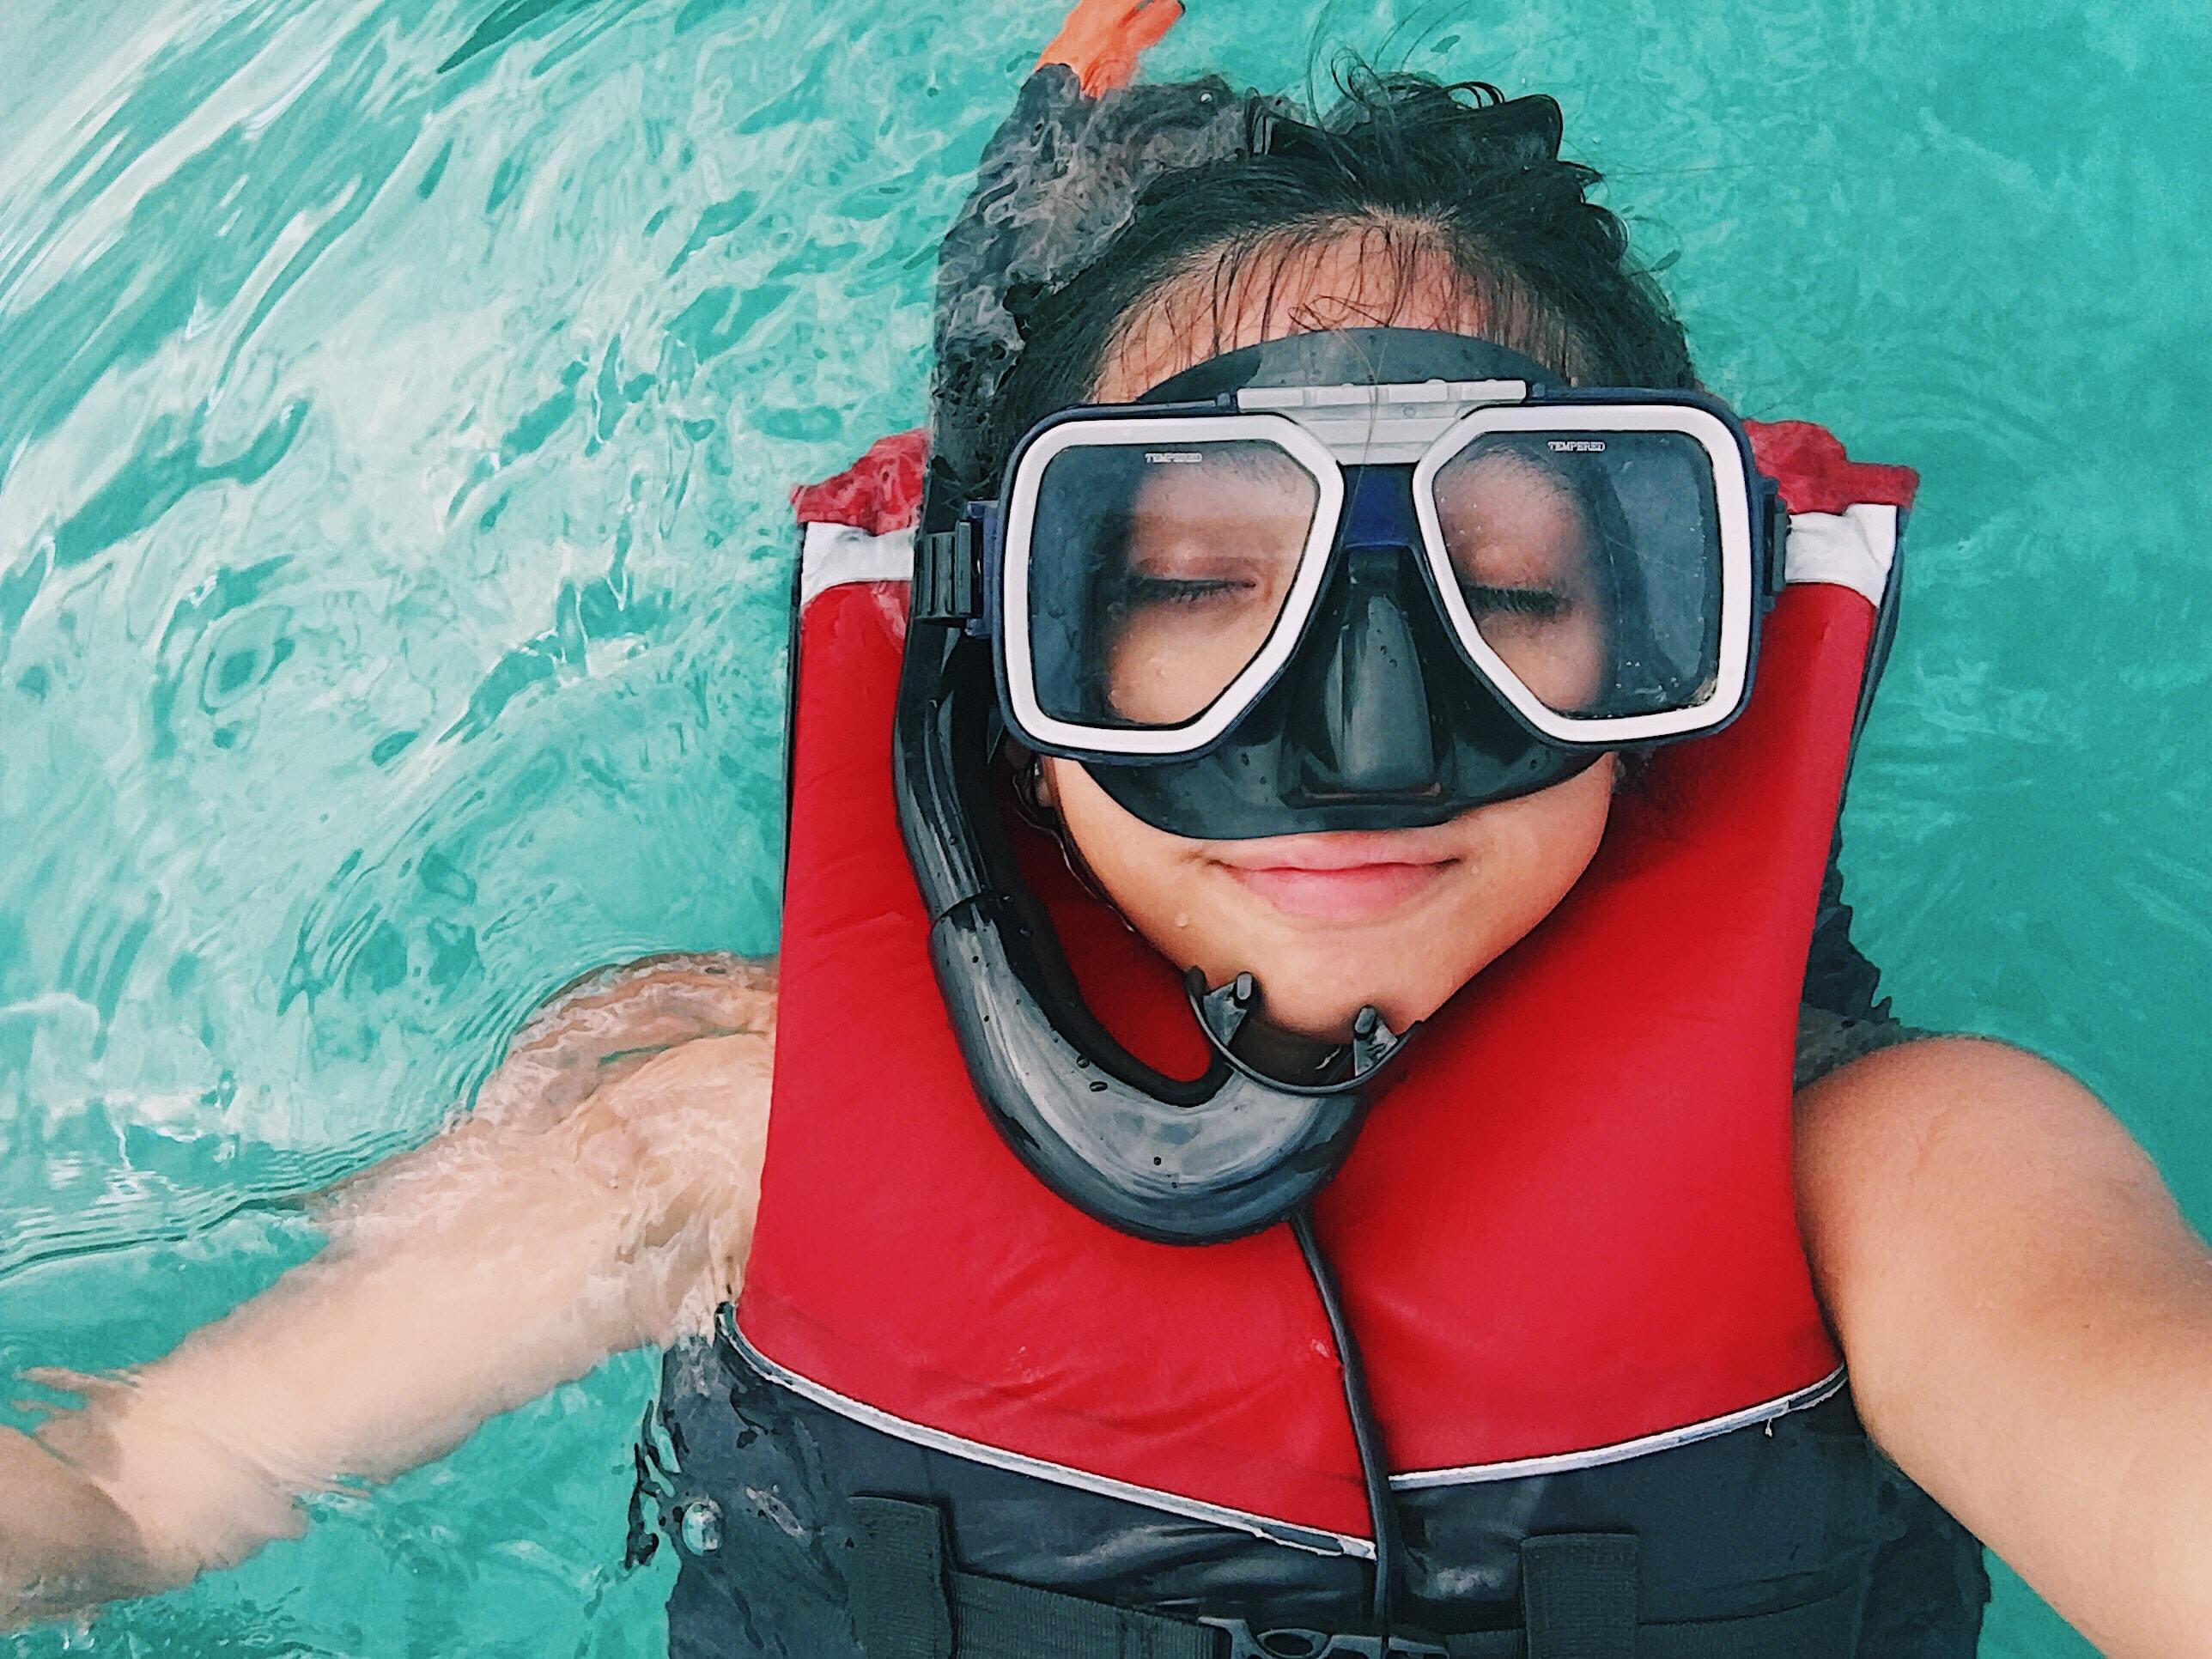 Snorkel vest vs. life jacket: Which is right for you?